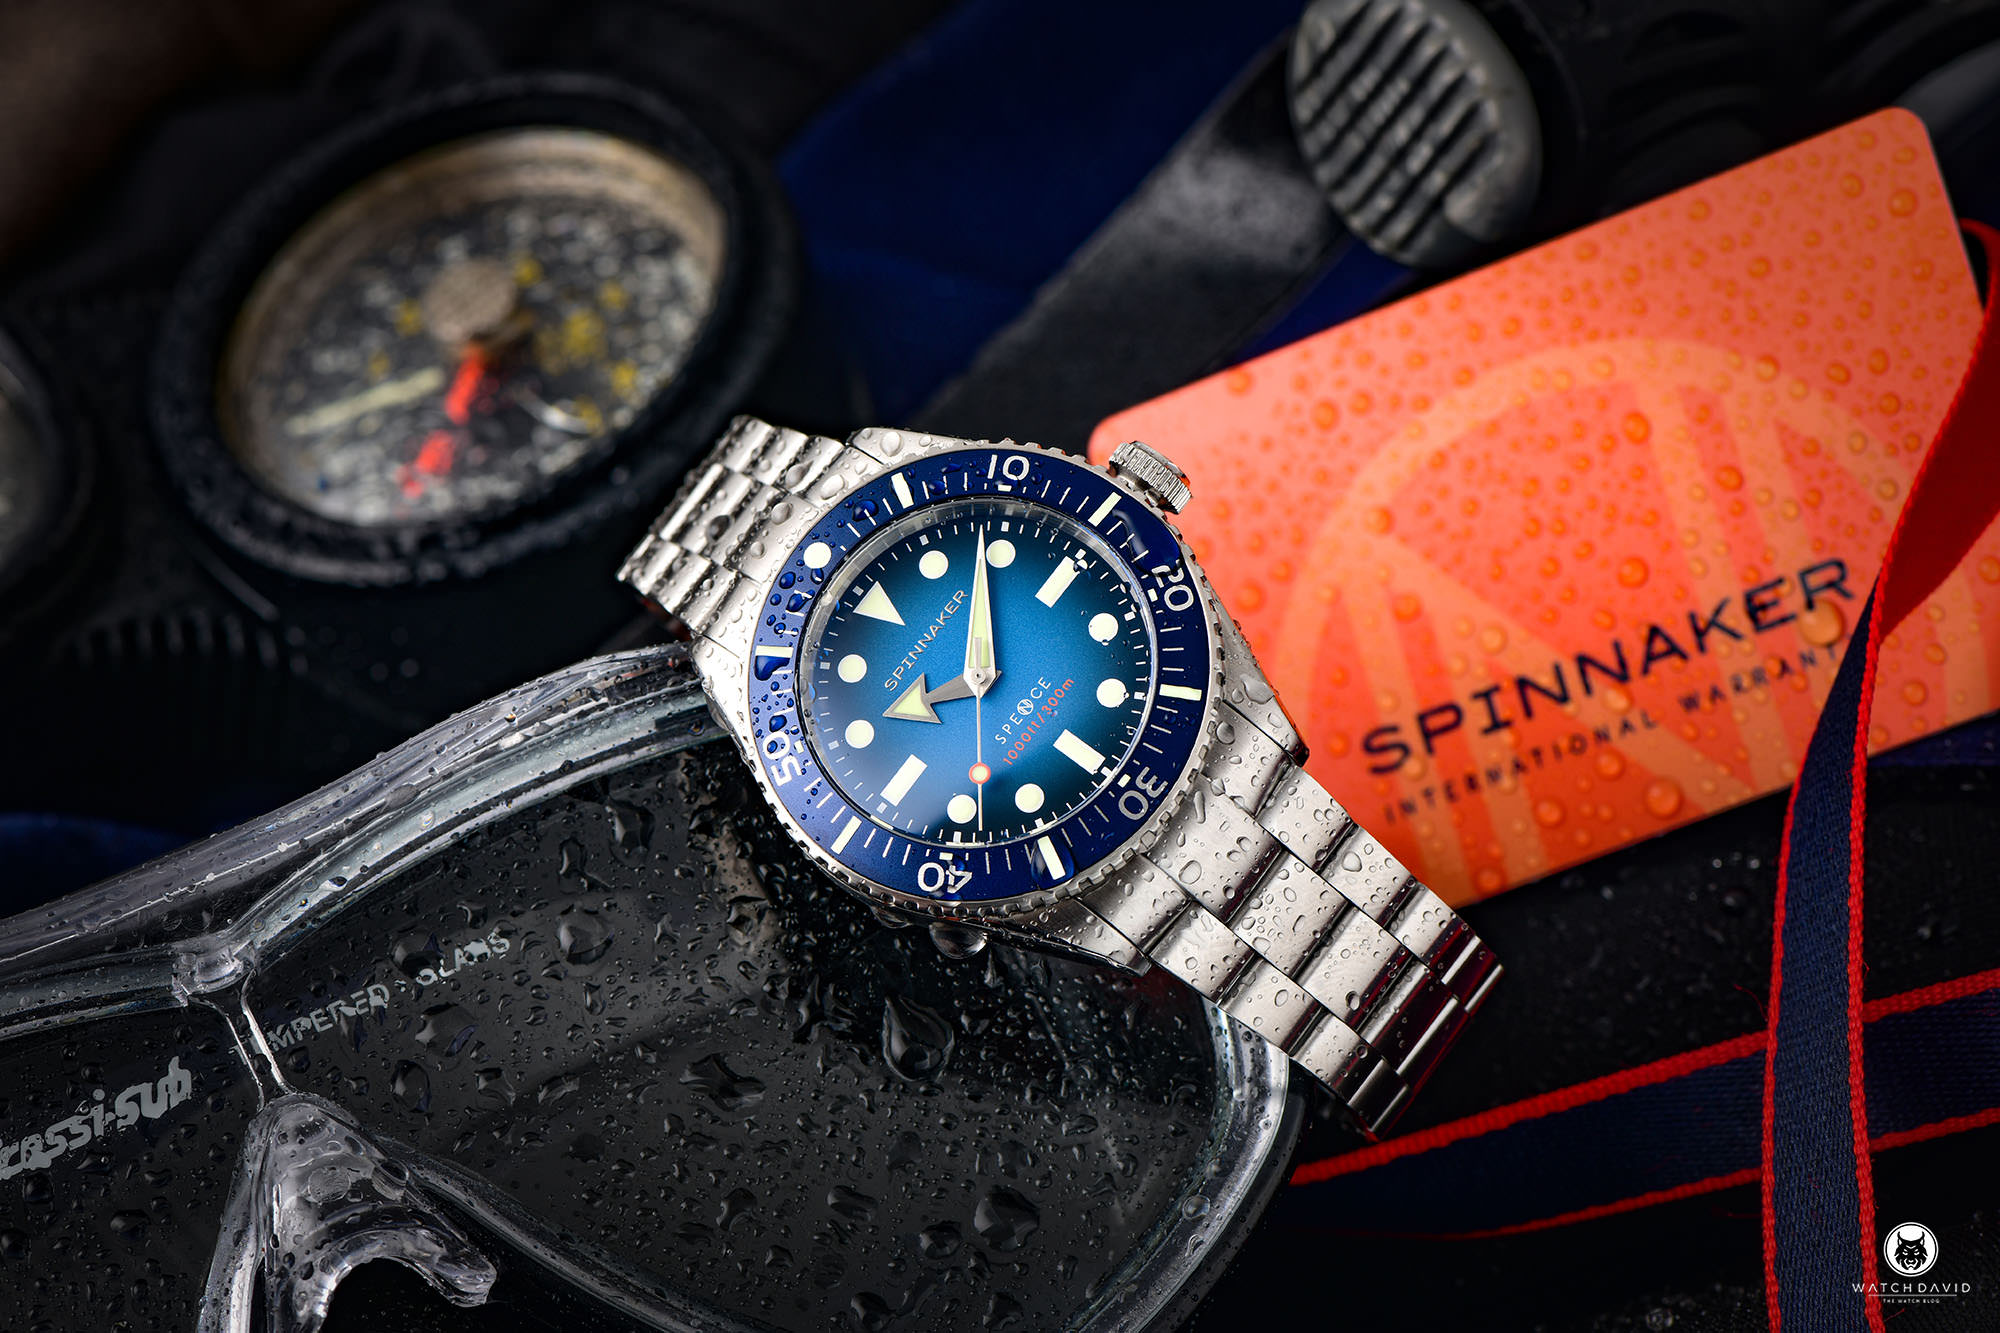 https://www.watchdavid.photography/spinnaker-spence-300-automatic-sp-509-4-review/